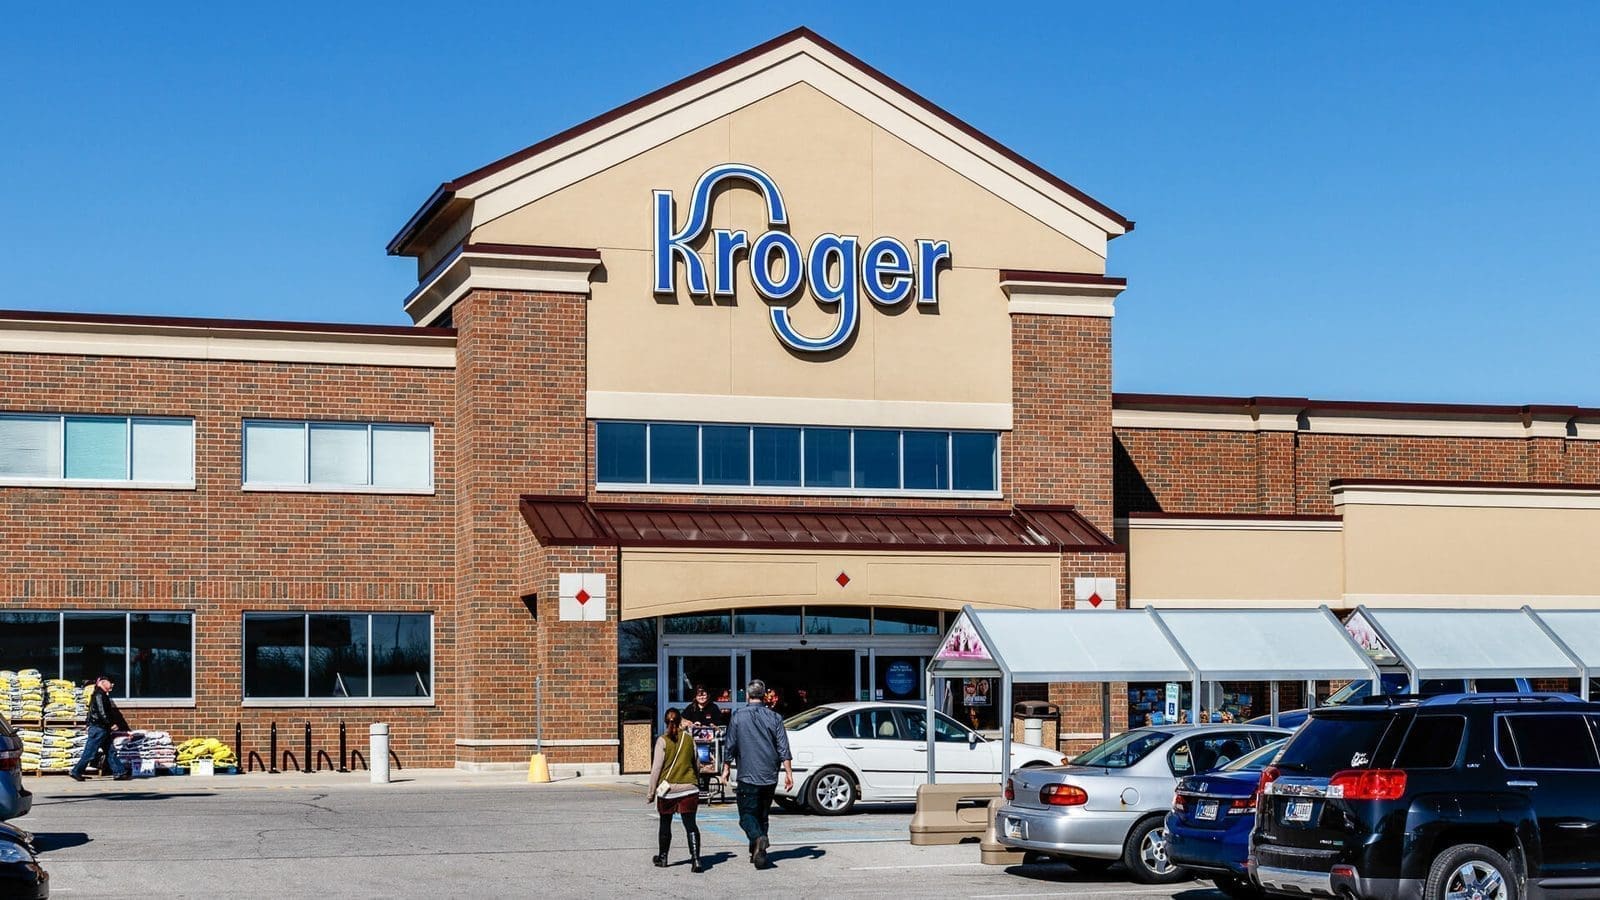 Kroger Company invests $70M in aseptic milk product line at Tamarack Farms Dairy